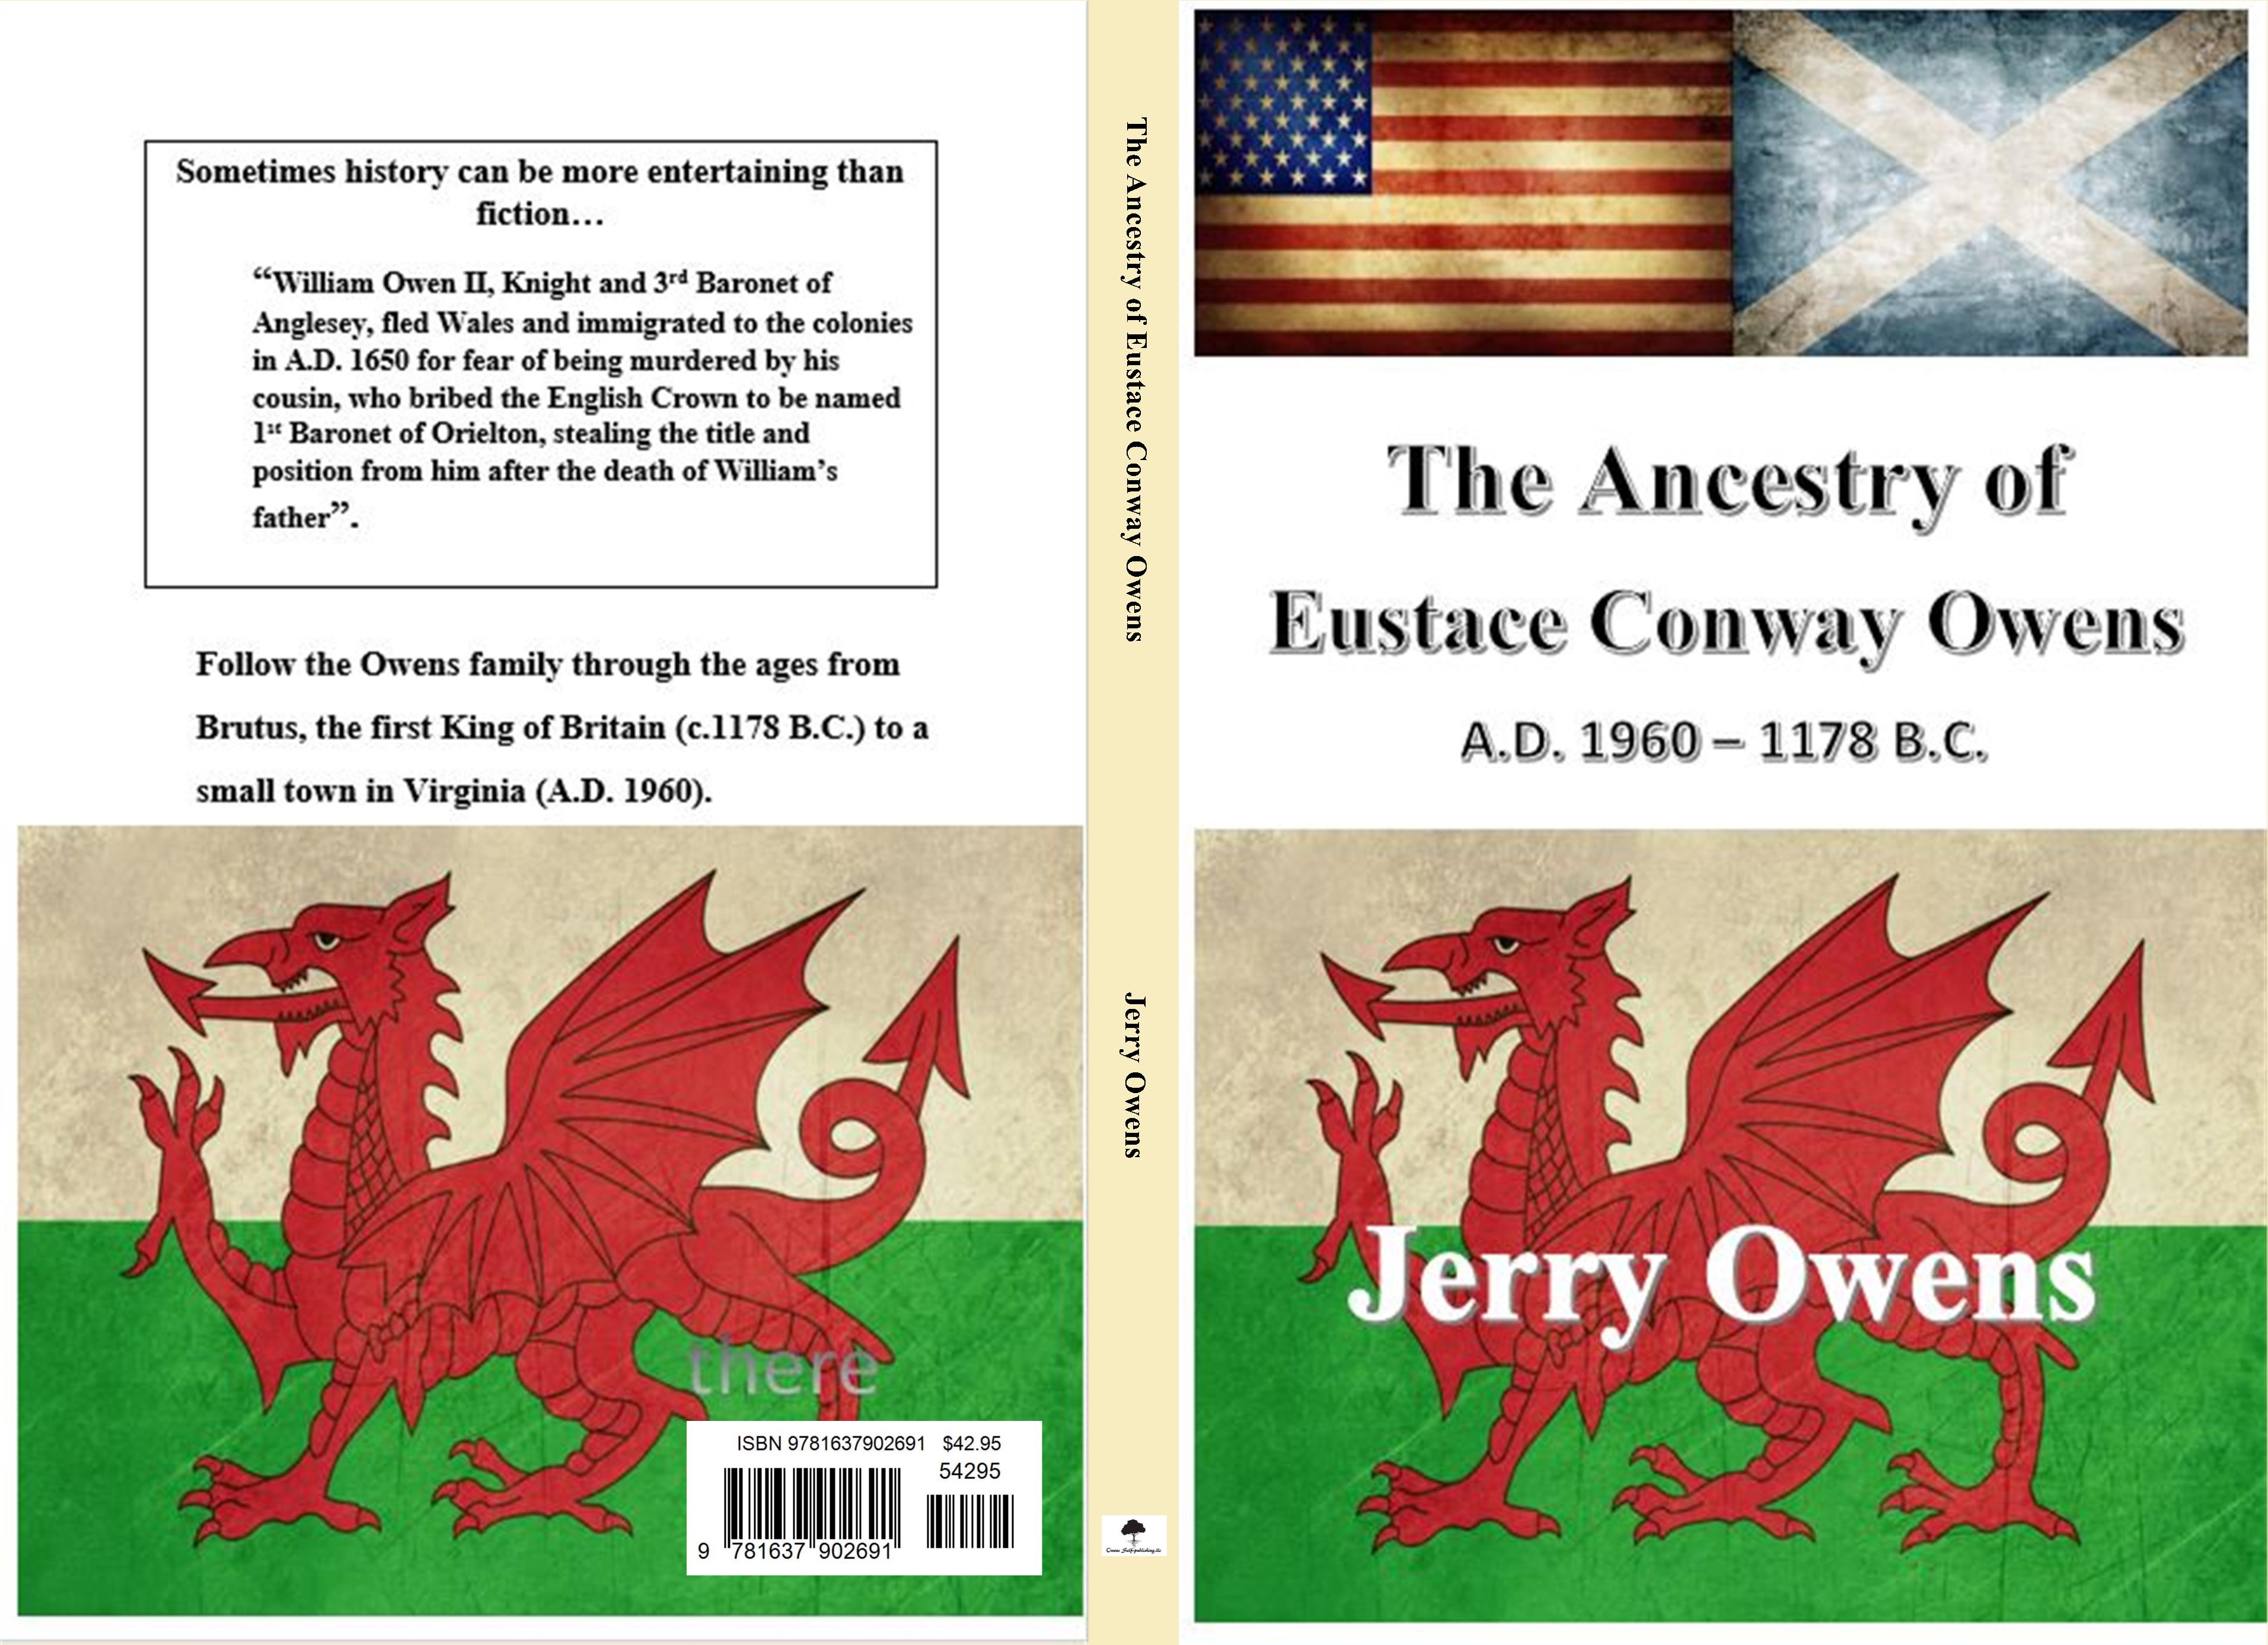 The Ancestry of Eustace Conway Owens cover image